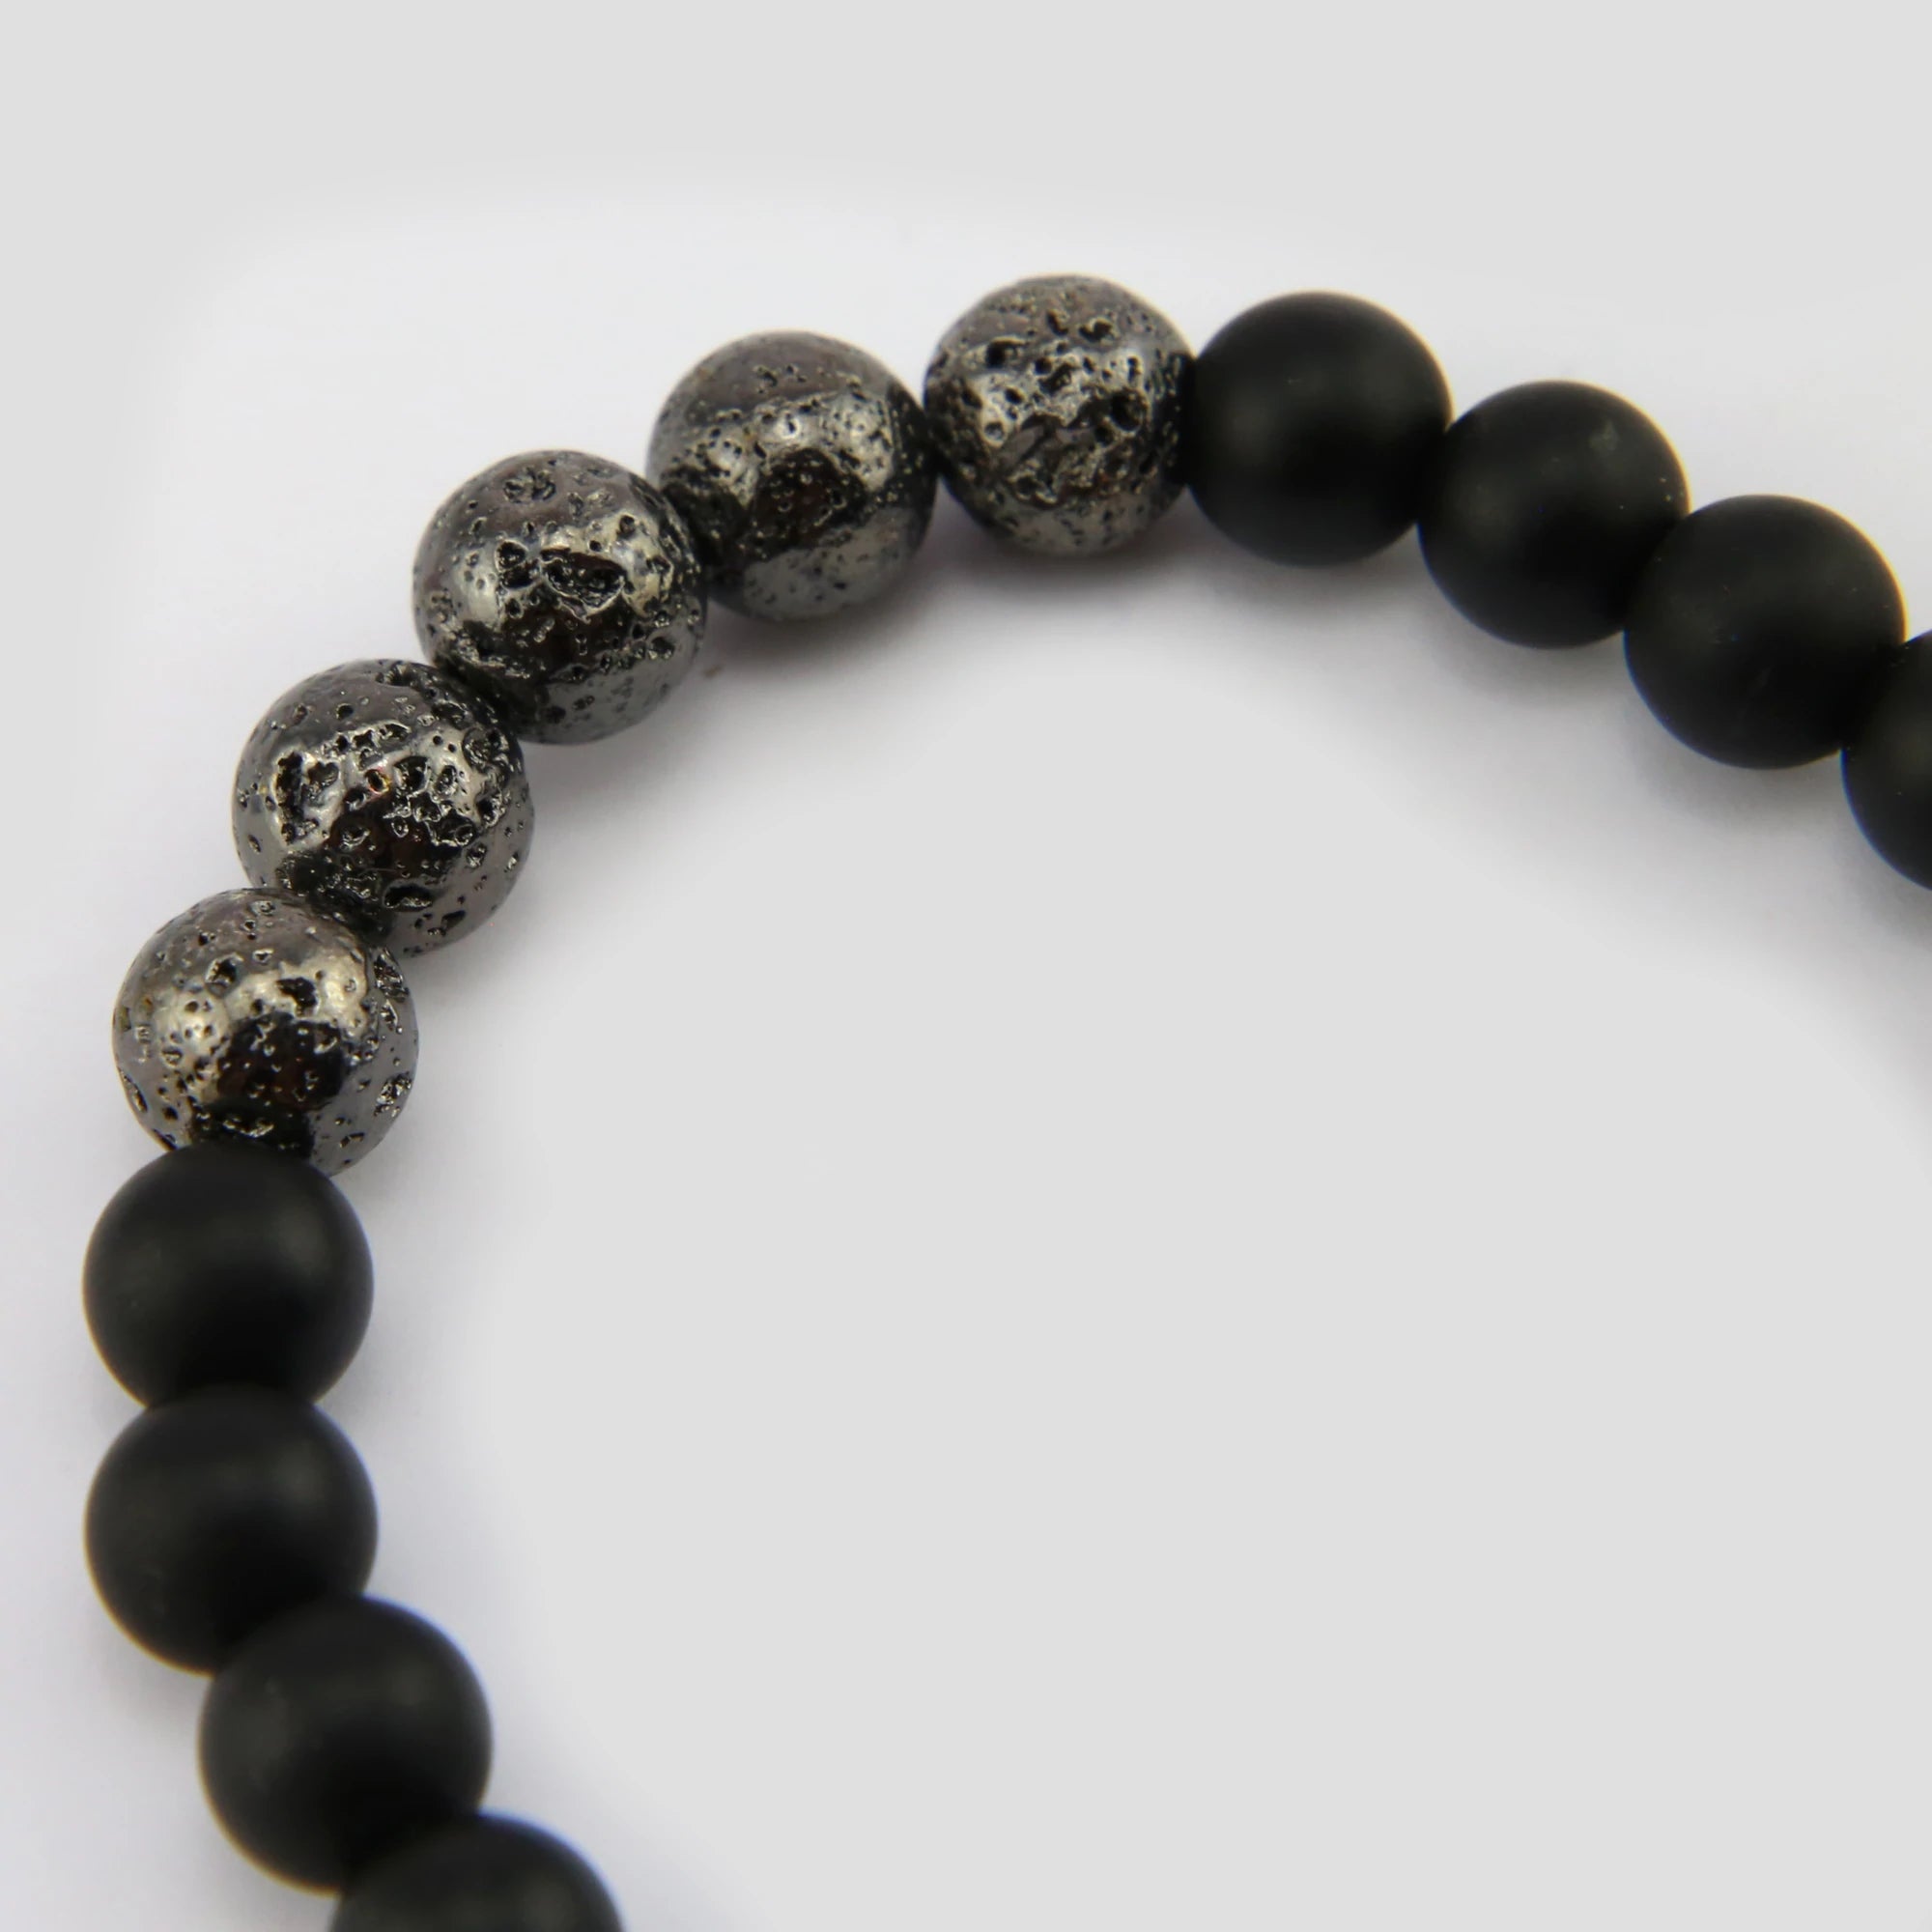 Fall in love with lava stone!